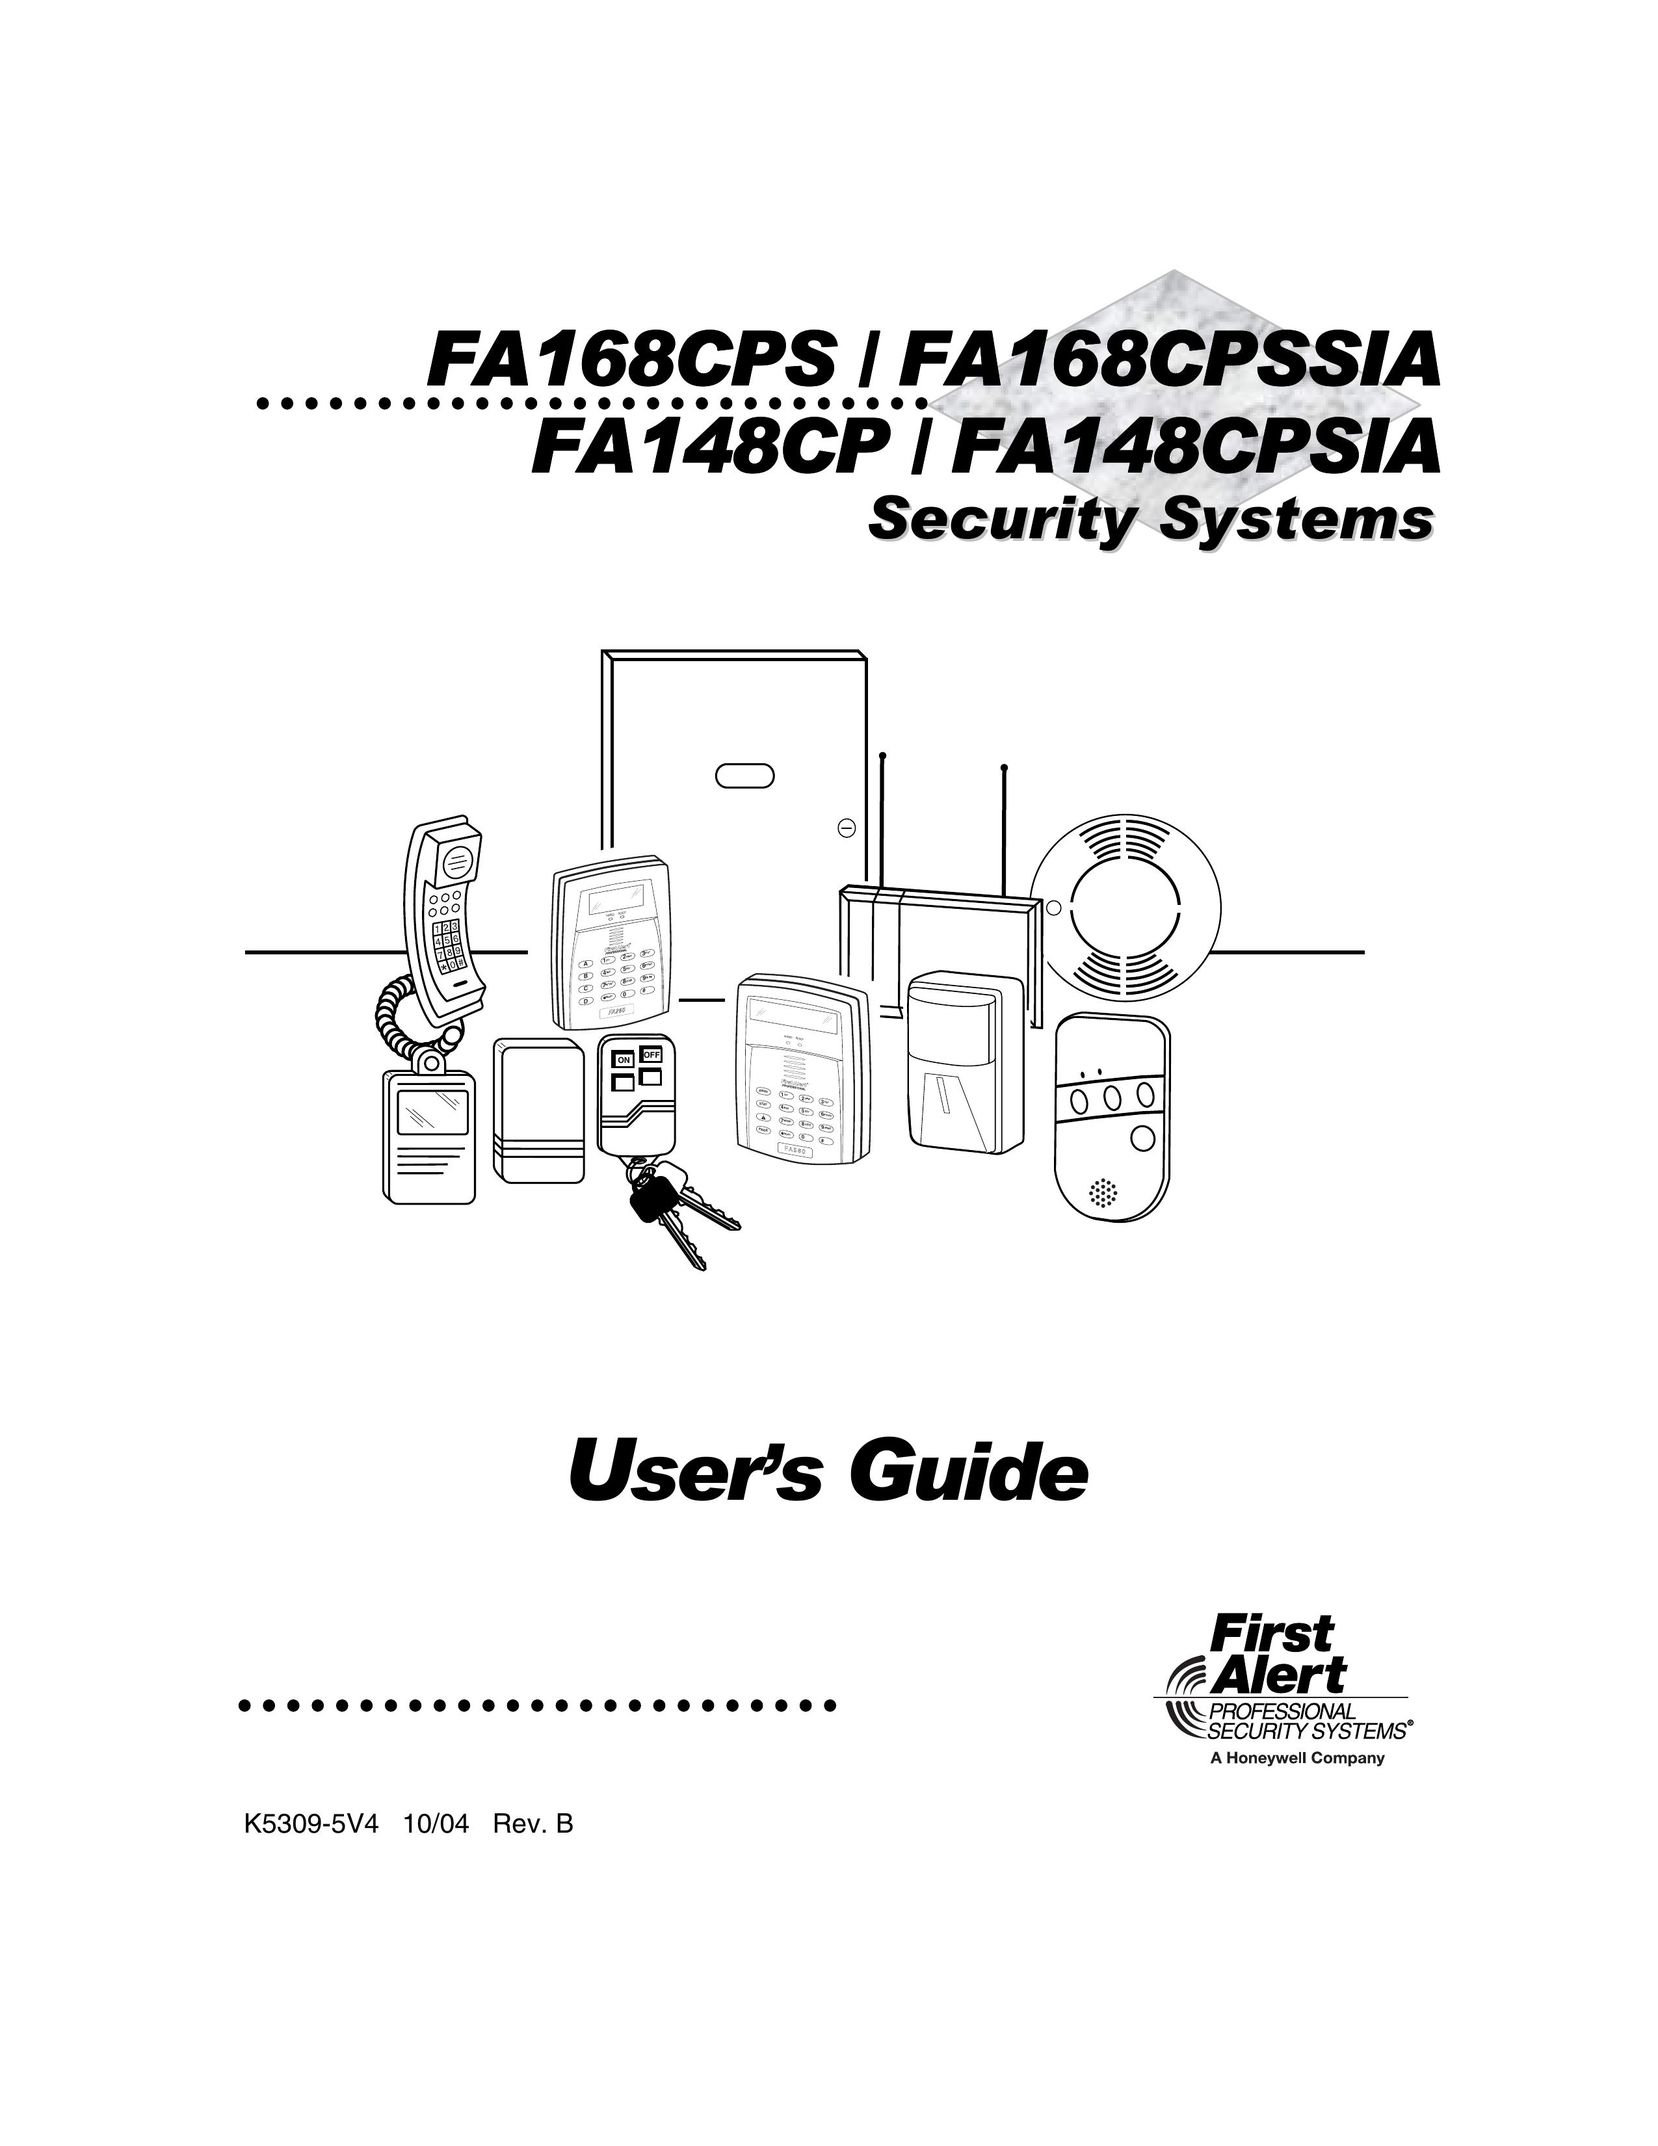 First Alert FA148CPSIA Home Security System User Manual